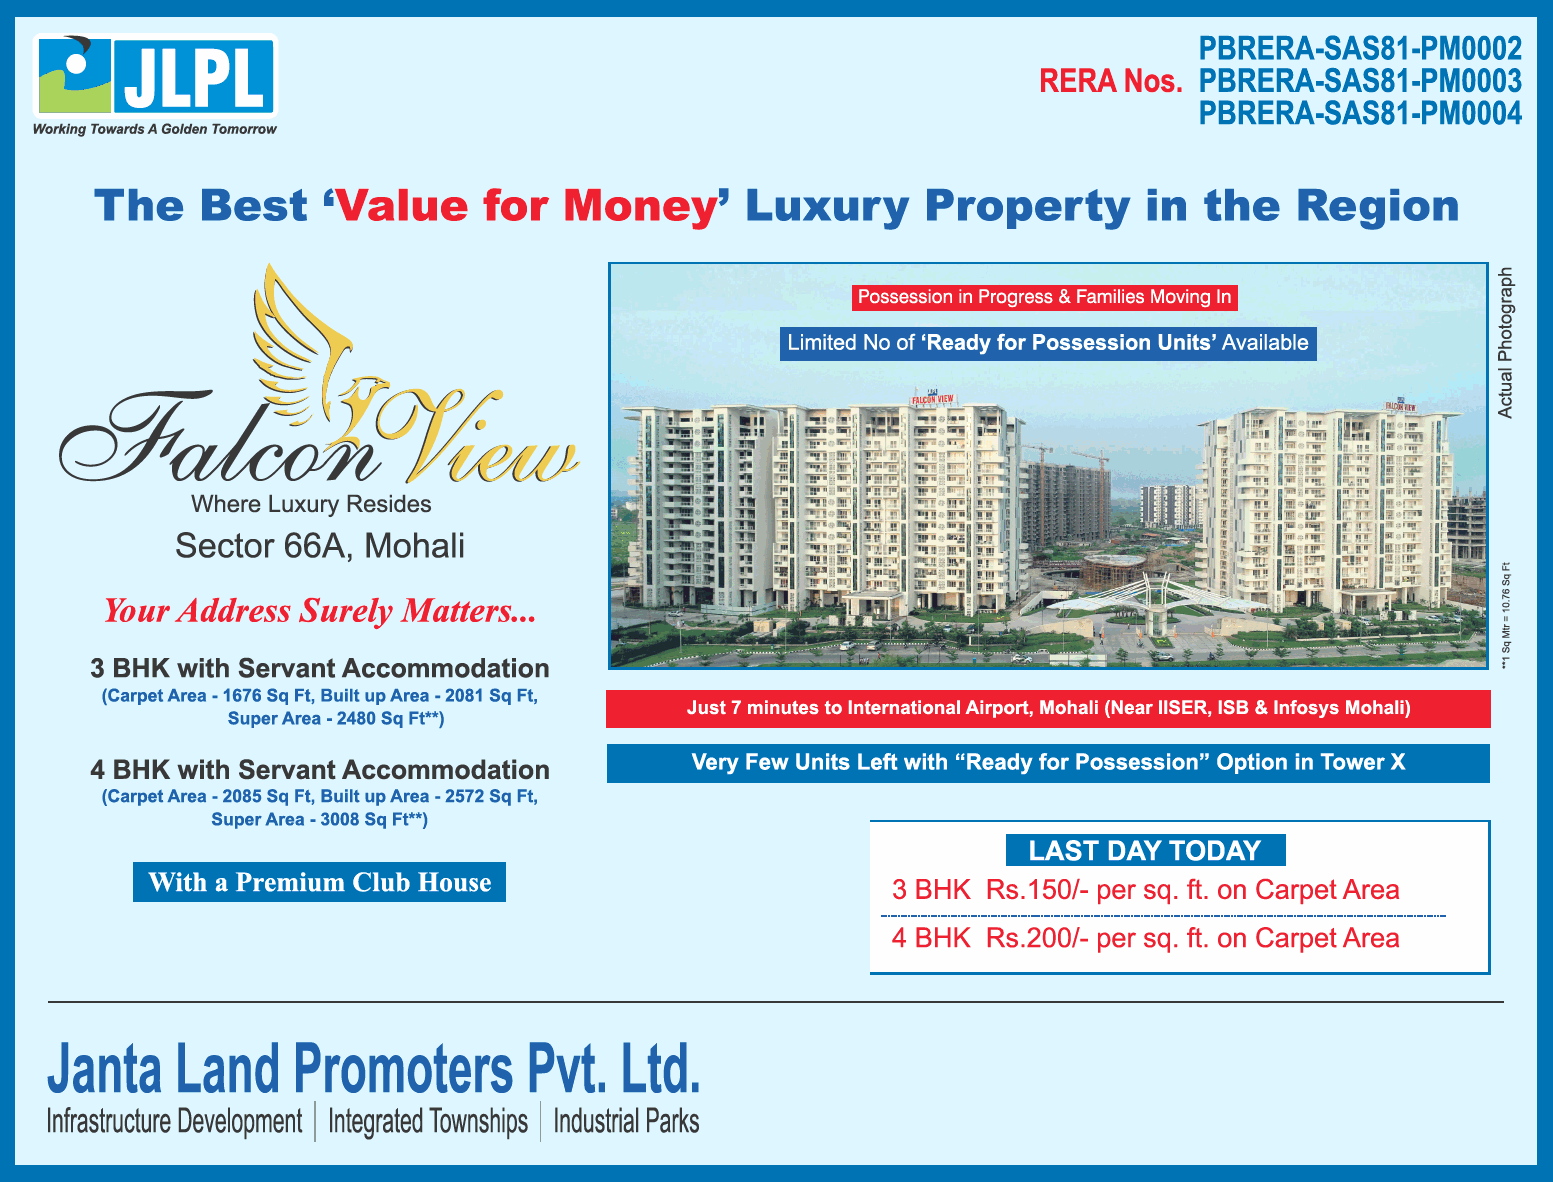 Book 3 & 4 bhk with servant accommodation at JLPL Falcon View in Mohali Update